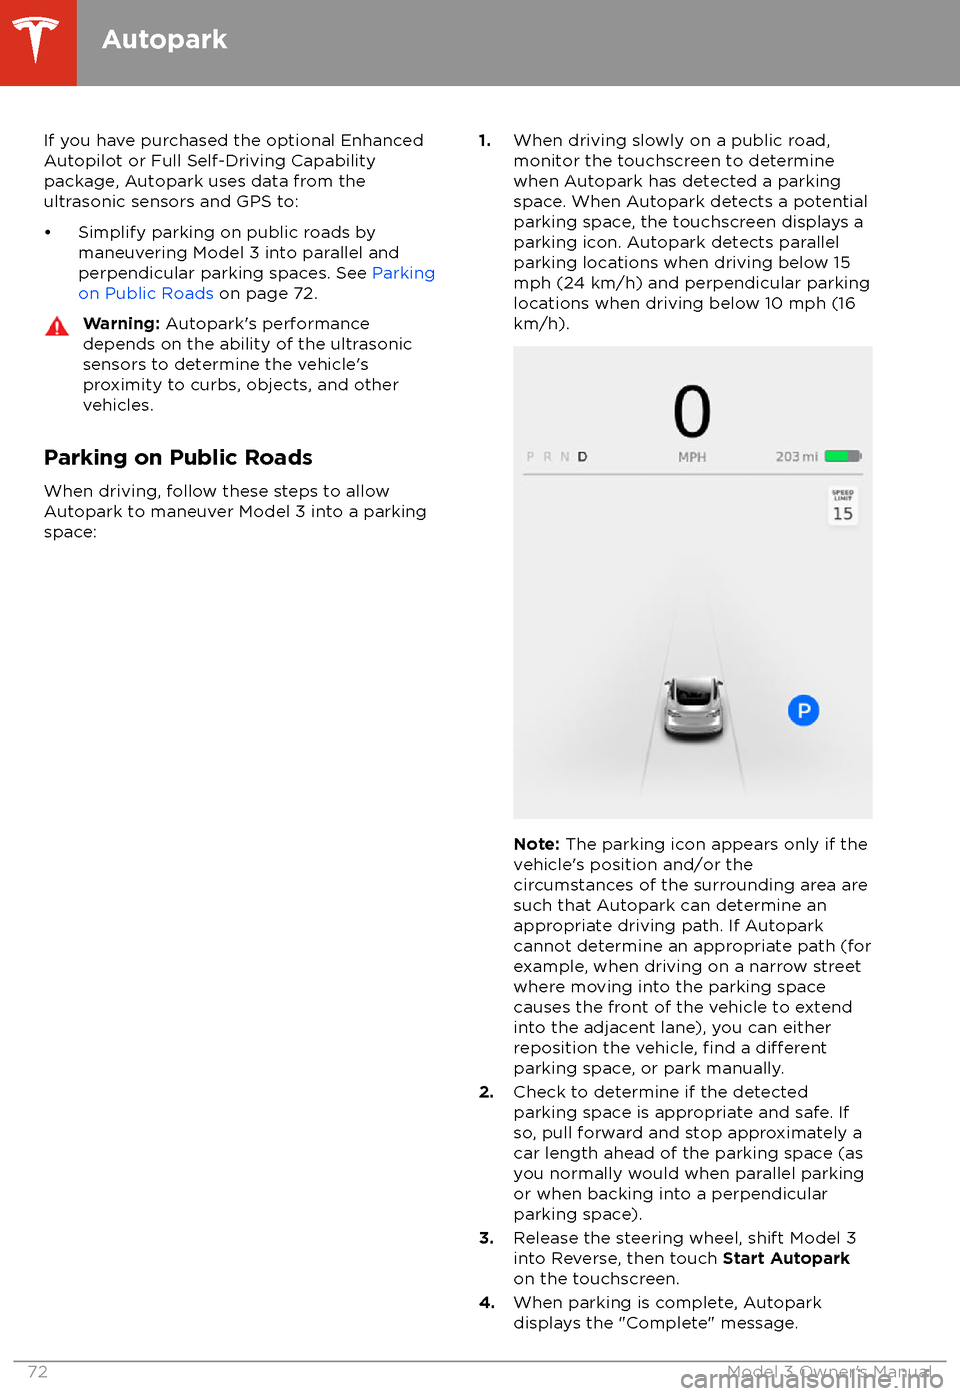 TESLA MODEL 3 2018 Manual PDF If you have purchased the optional EnhancedAutopilot or Full Self-Driving Capabilitypackage, Autopark uses data from theultrasonic sensors and GPS to:
